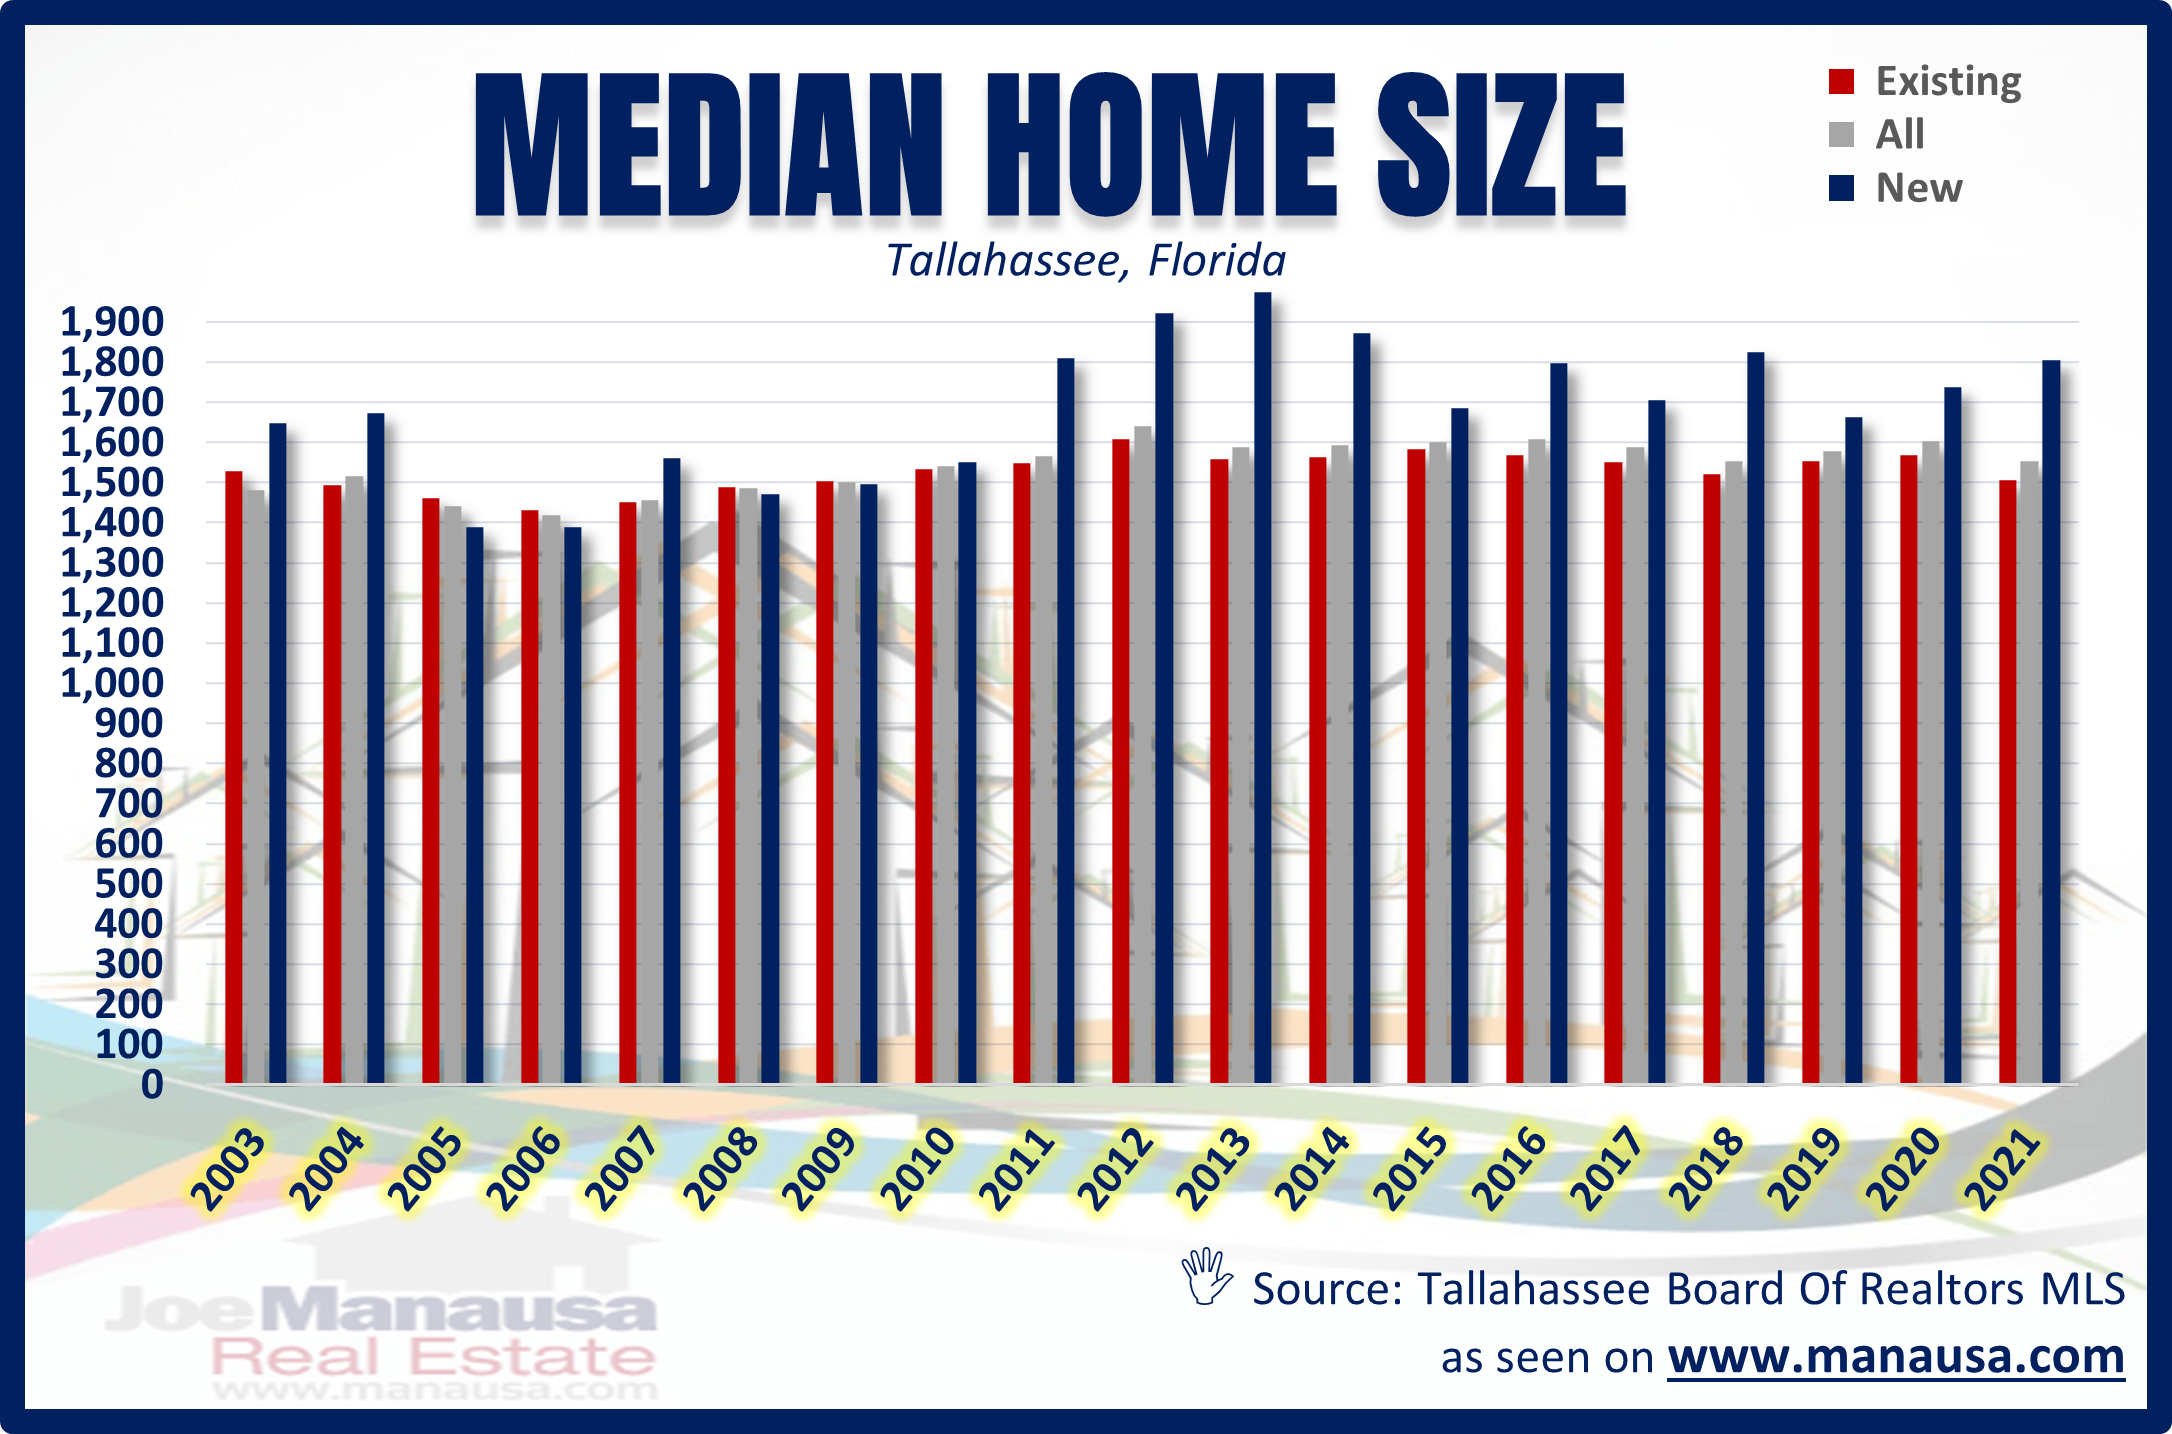 Tallahassee Median Home Size